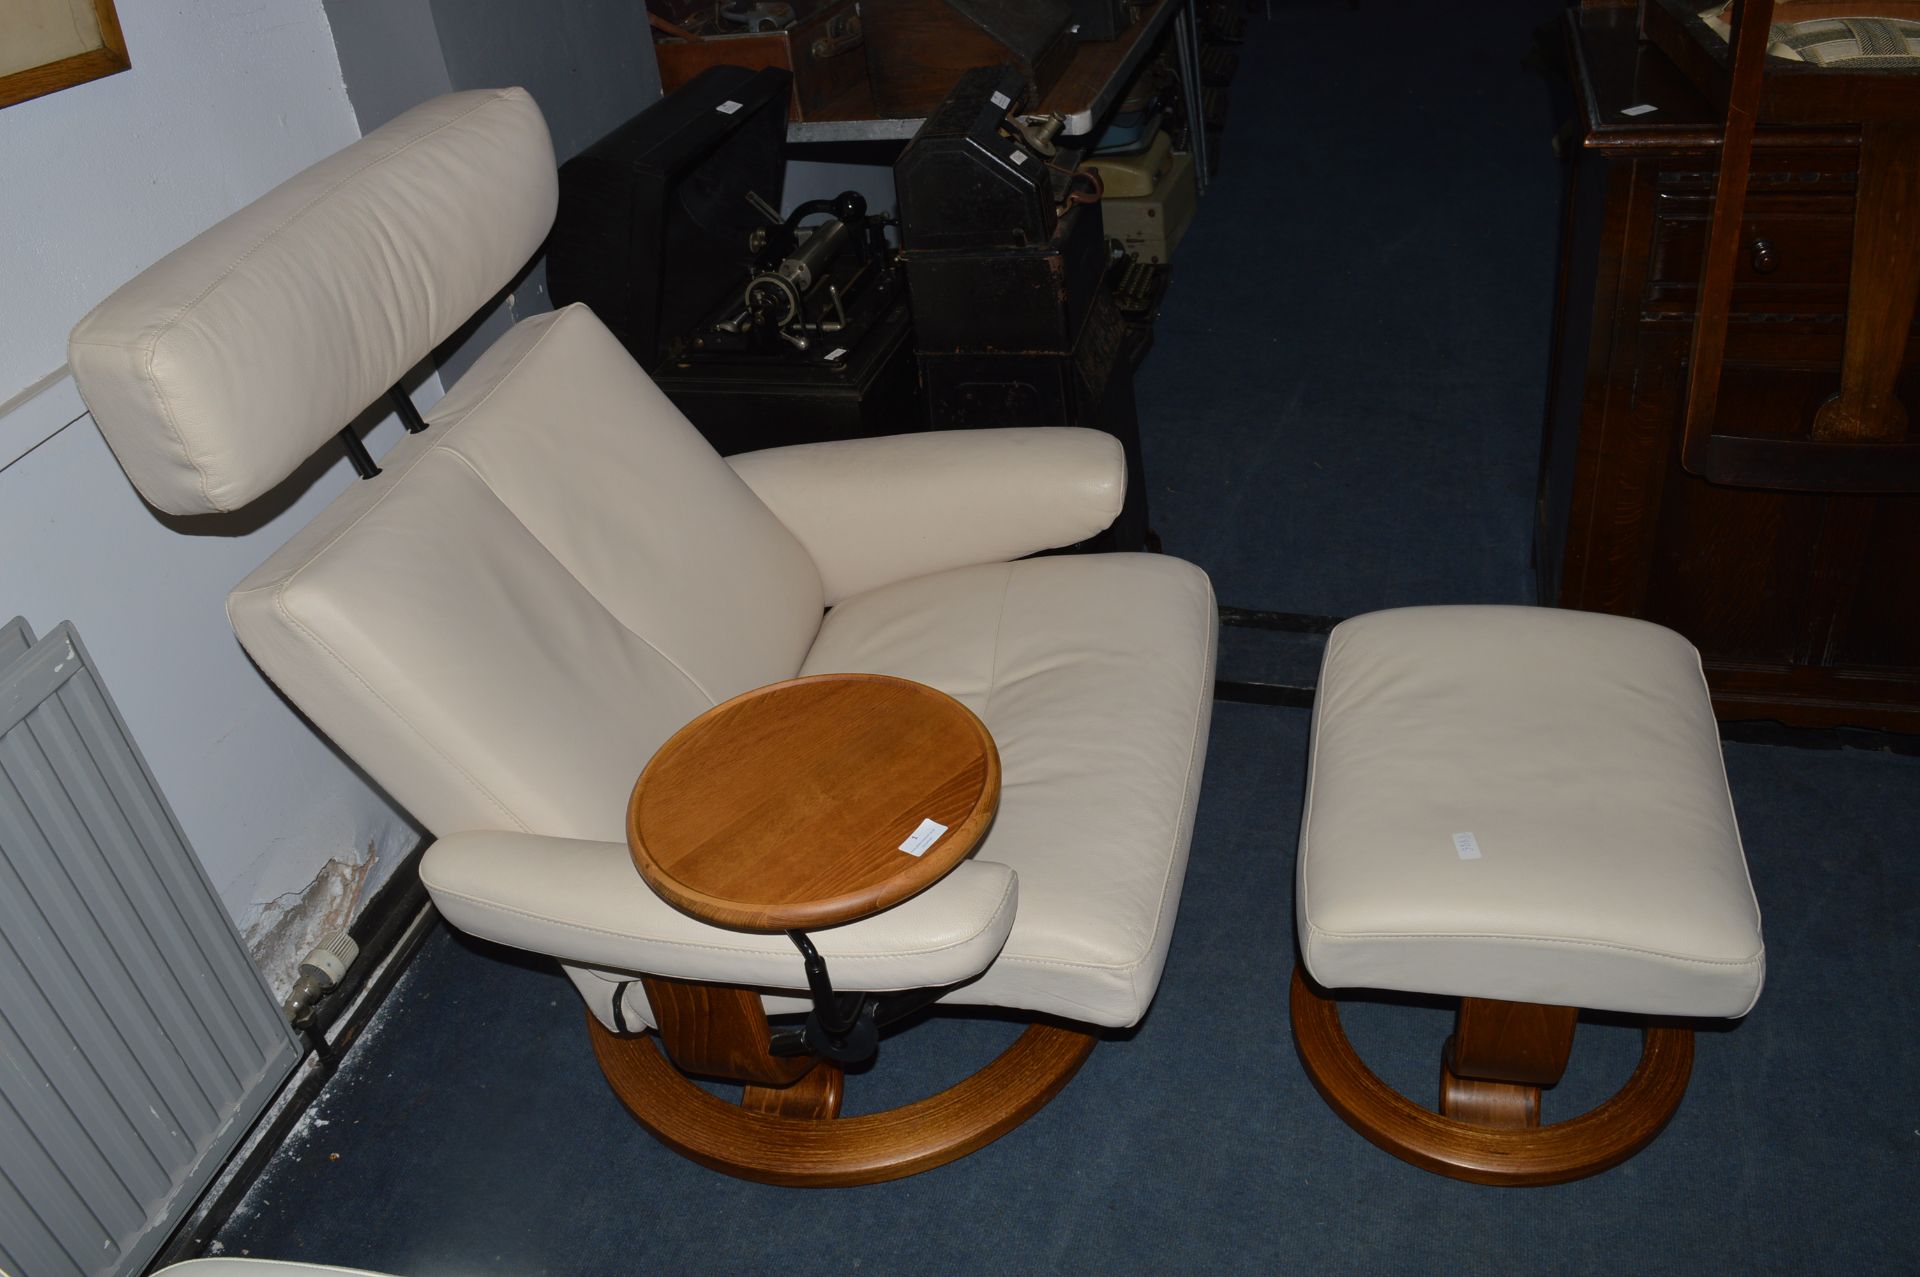 Stressless Cream Leather Recliner with Footstool - Image 2 of 2